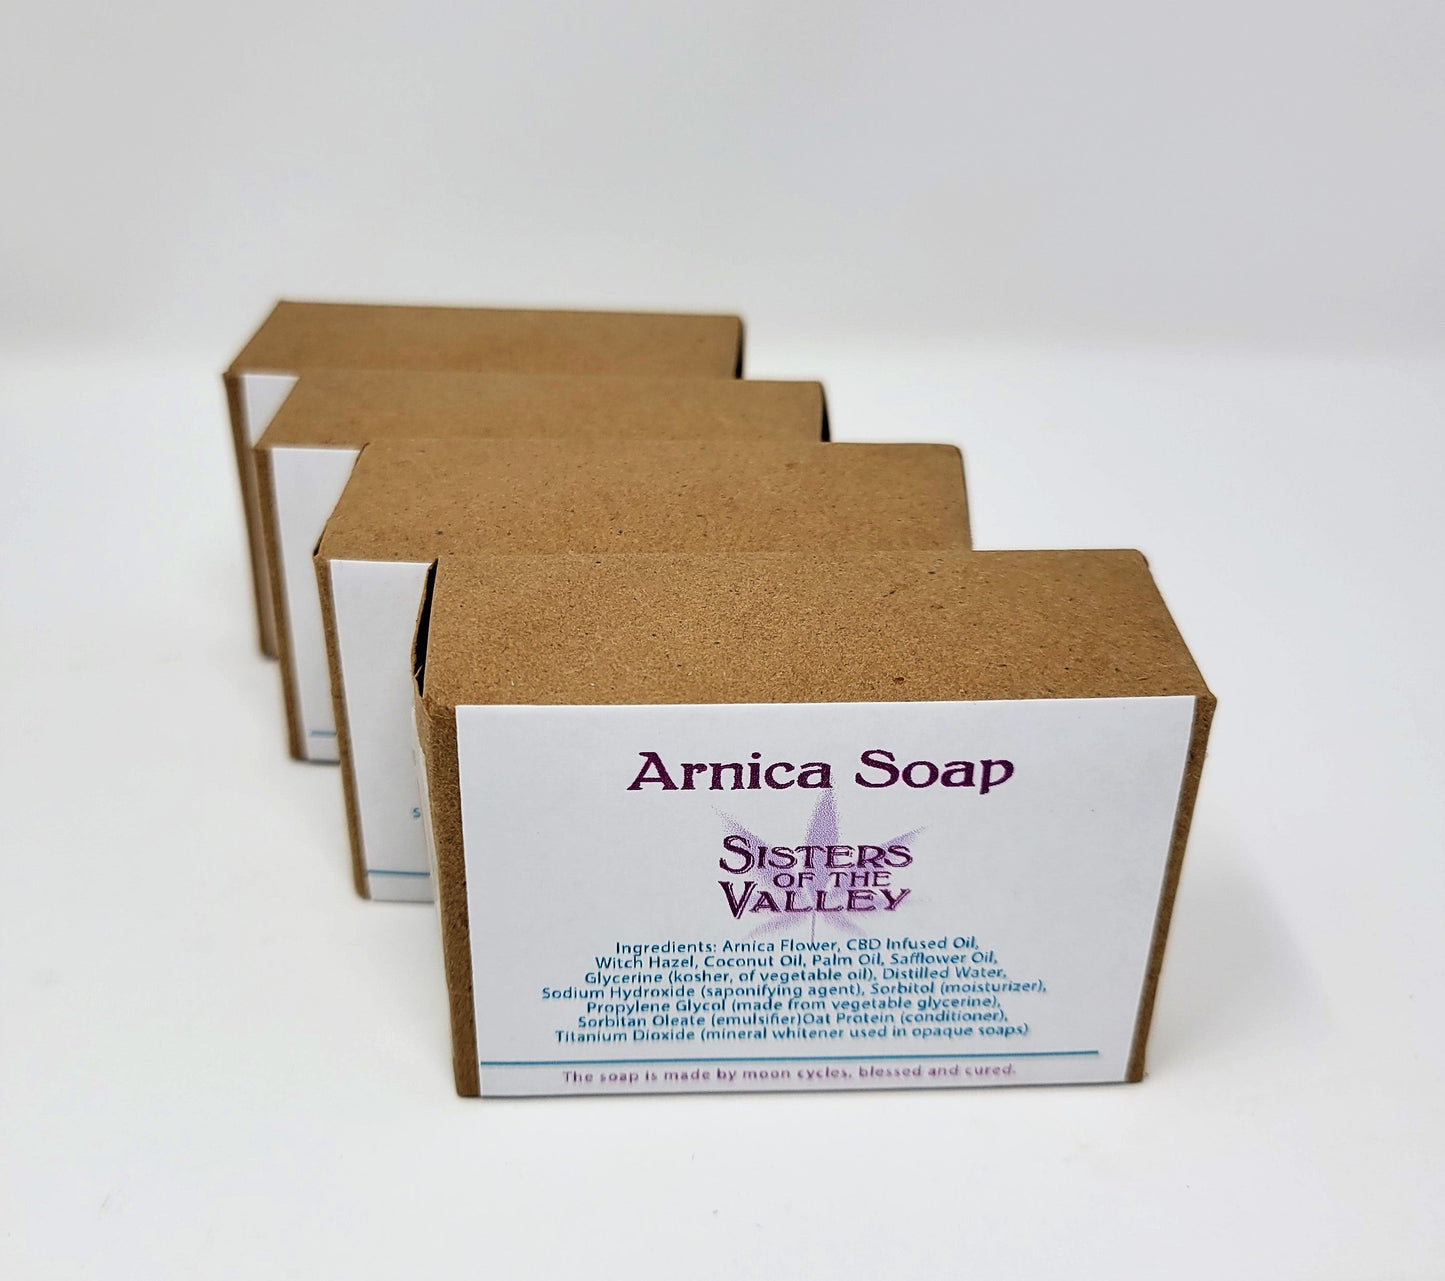 12 x Arnica Soap Infused with CBD